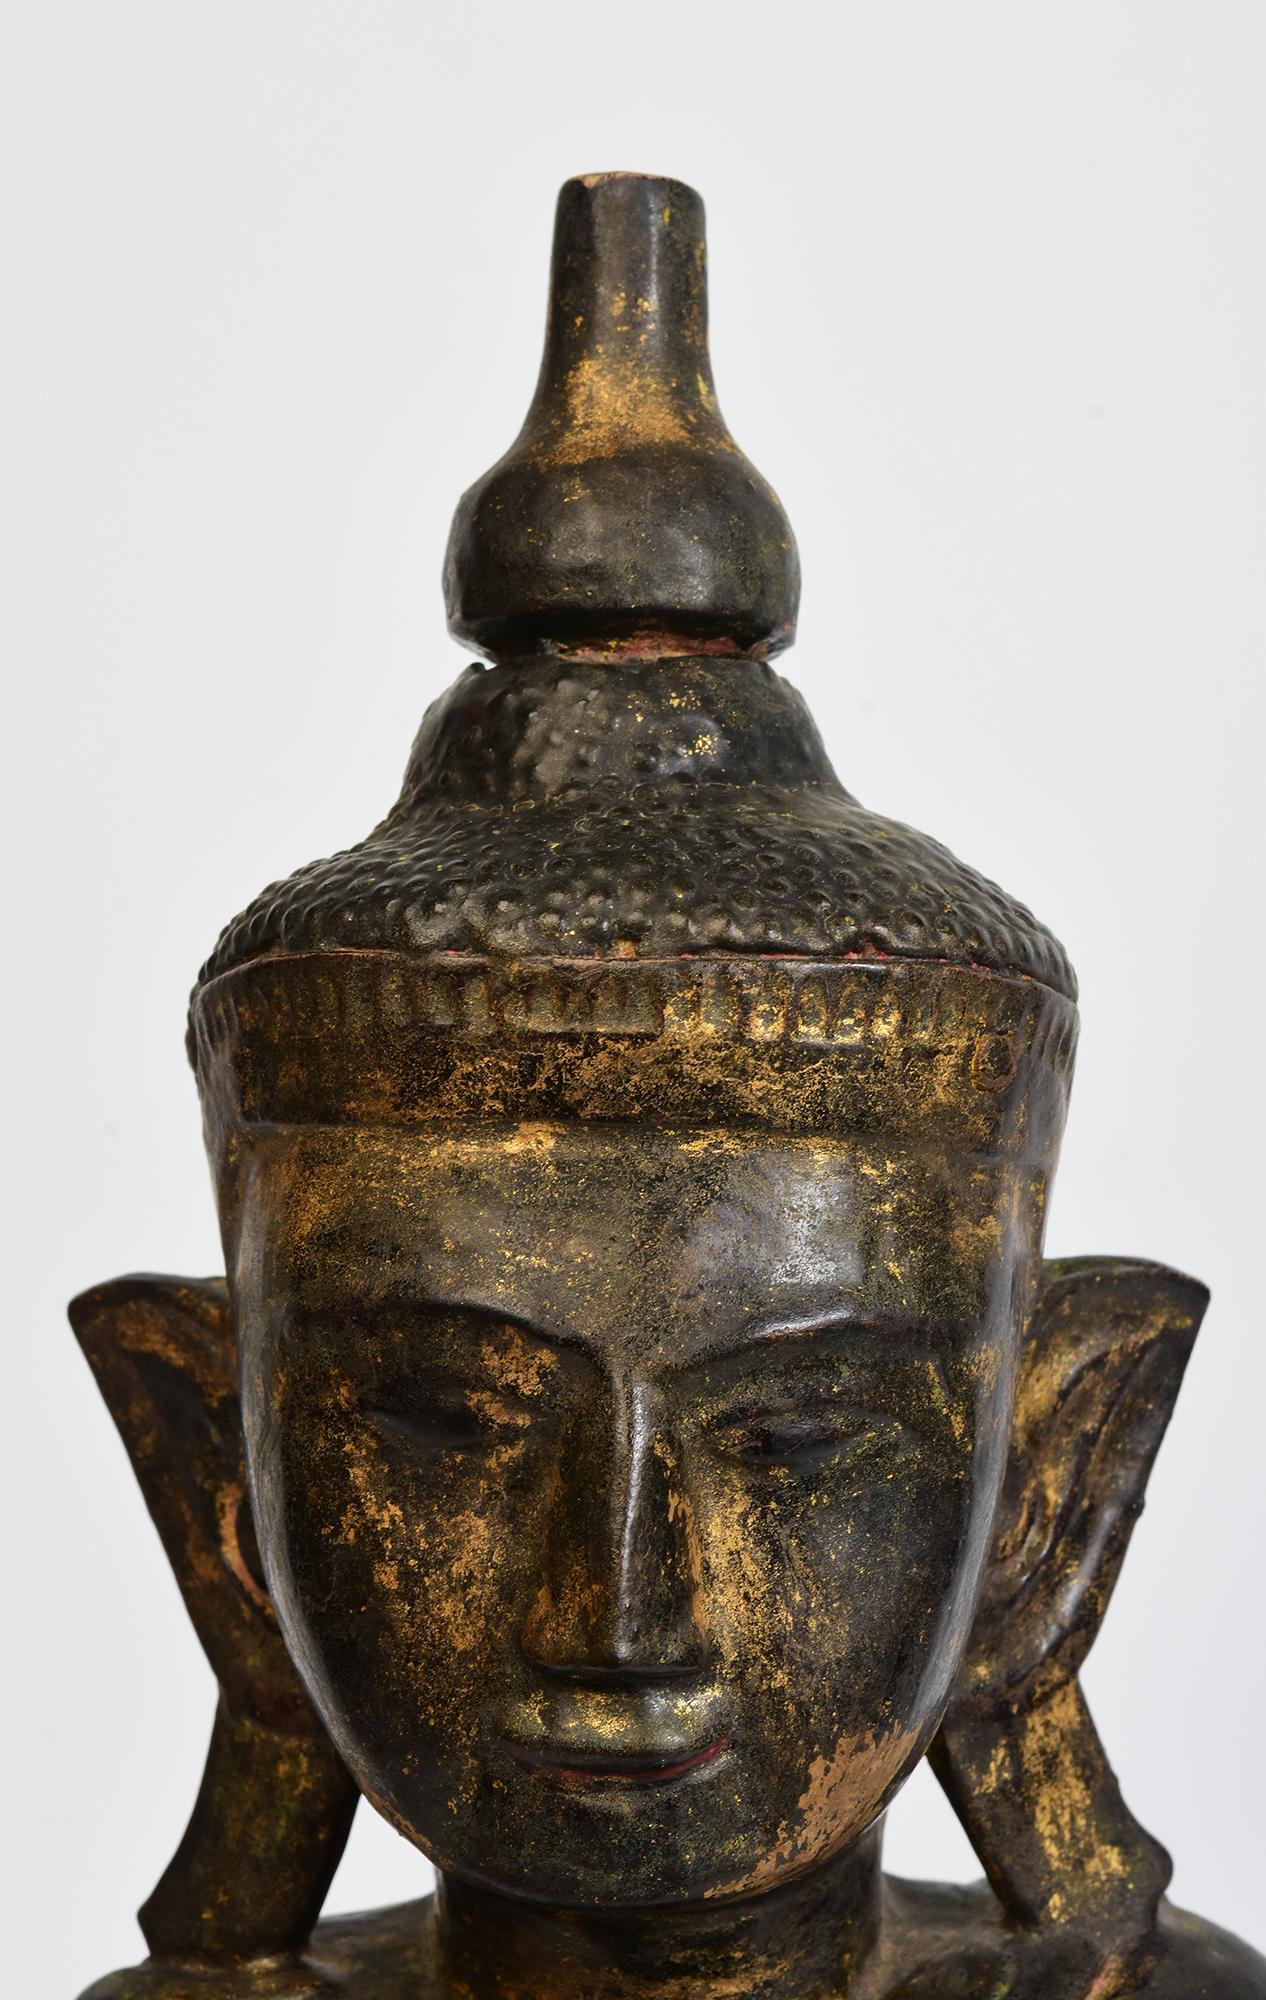 Burmese wooden Buddha sitting in Mara Vijaya (calling the earth to witness) posture on a base.

Age: Burma, Shan Period, 18th Century
Size: Height 53.5 C.M. / Width 20.5 C.M. / Depth 9.8 C.M.
Condition: Nice condition overall (some expected